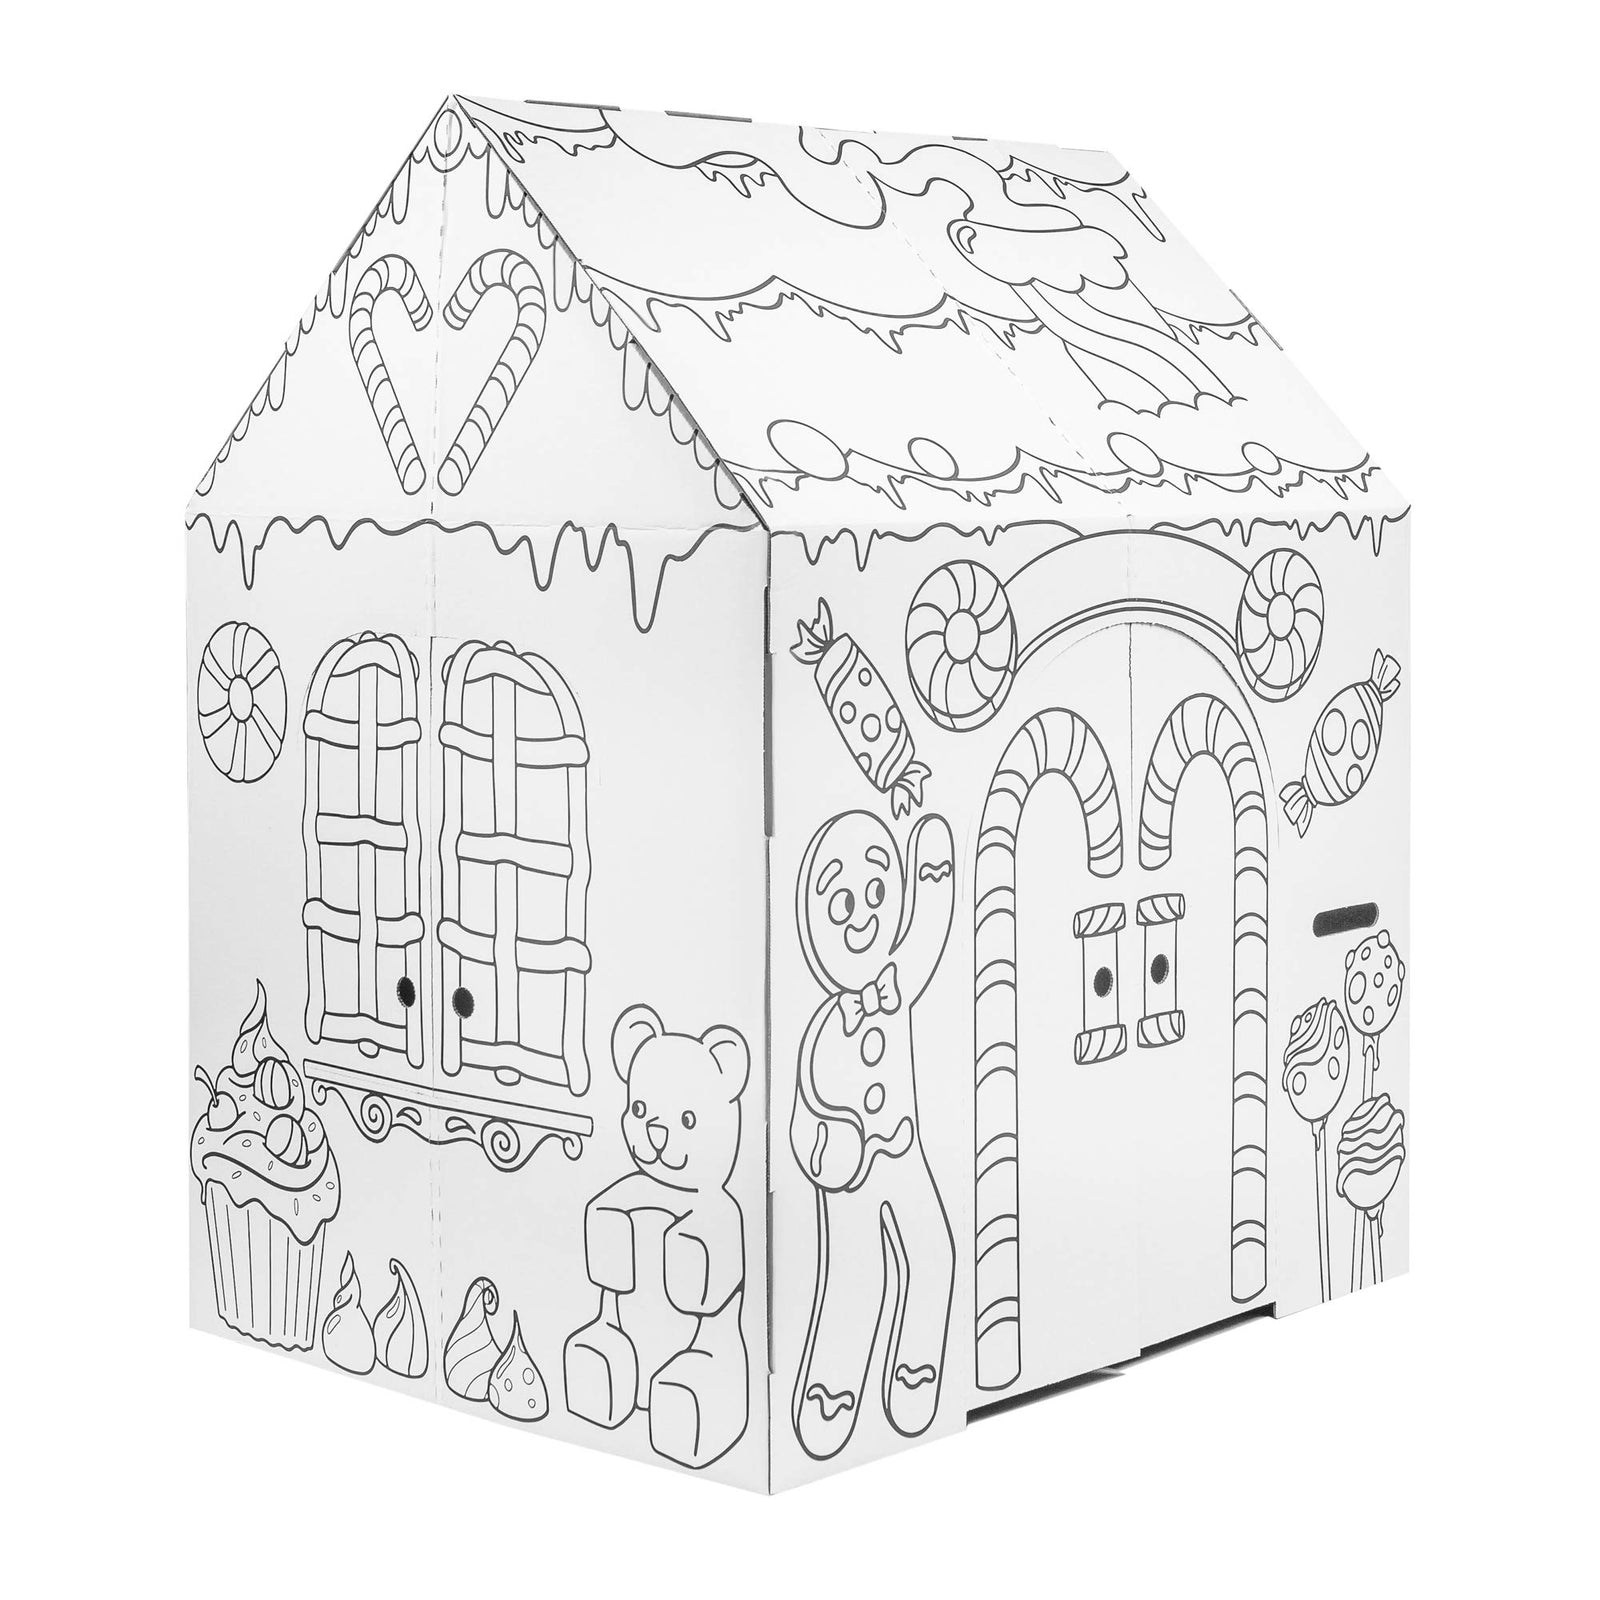 Easy Playhouse Gingerbread House - Kids Art & Craft for Indoor Fun, Color Favorite Holiday Sweets & Winter Friends– Decorate & Personalize a Cardboard Fort, 32" X 26. 5" X 40. 5" - Made in USA, Age 3+